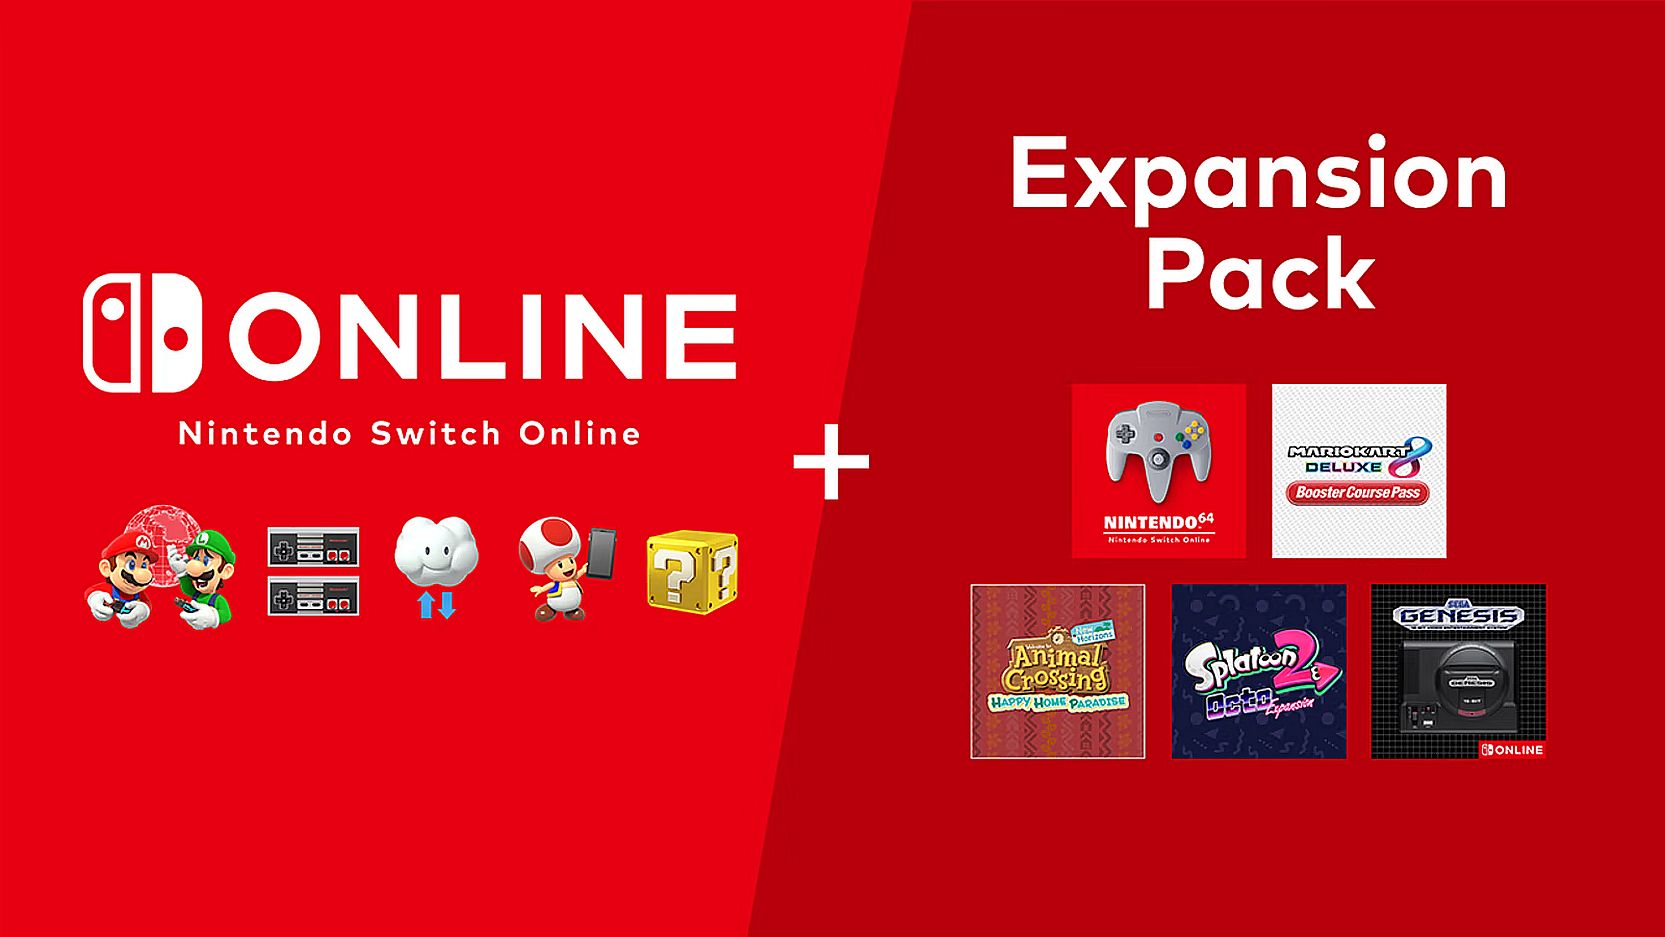 Image for More Nintendo 64 games headed to Nintendo Switch Online + Expansion Pack